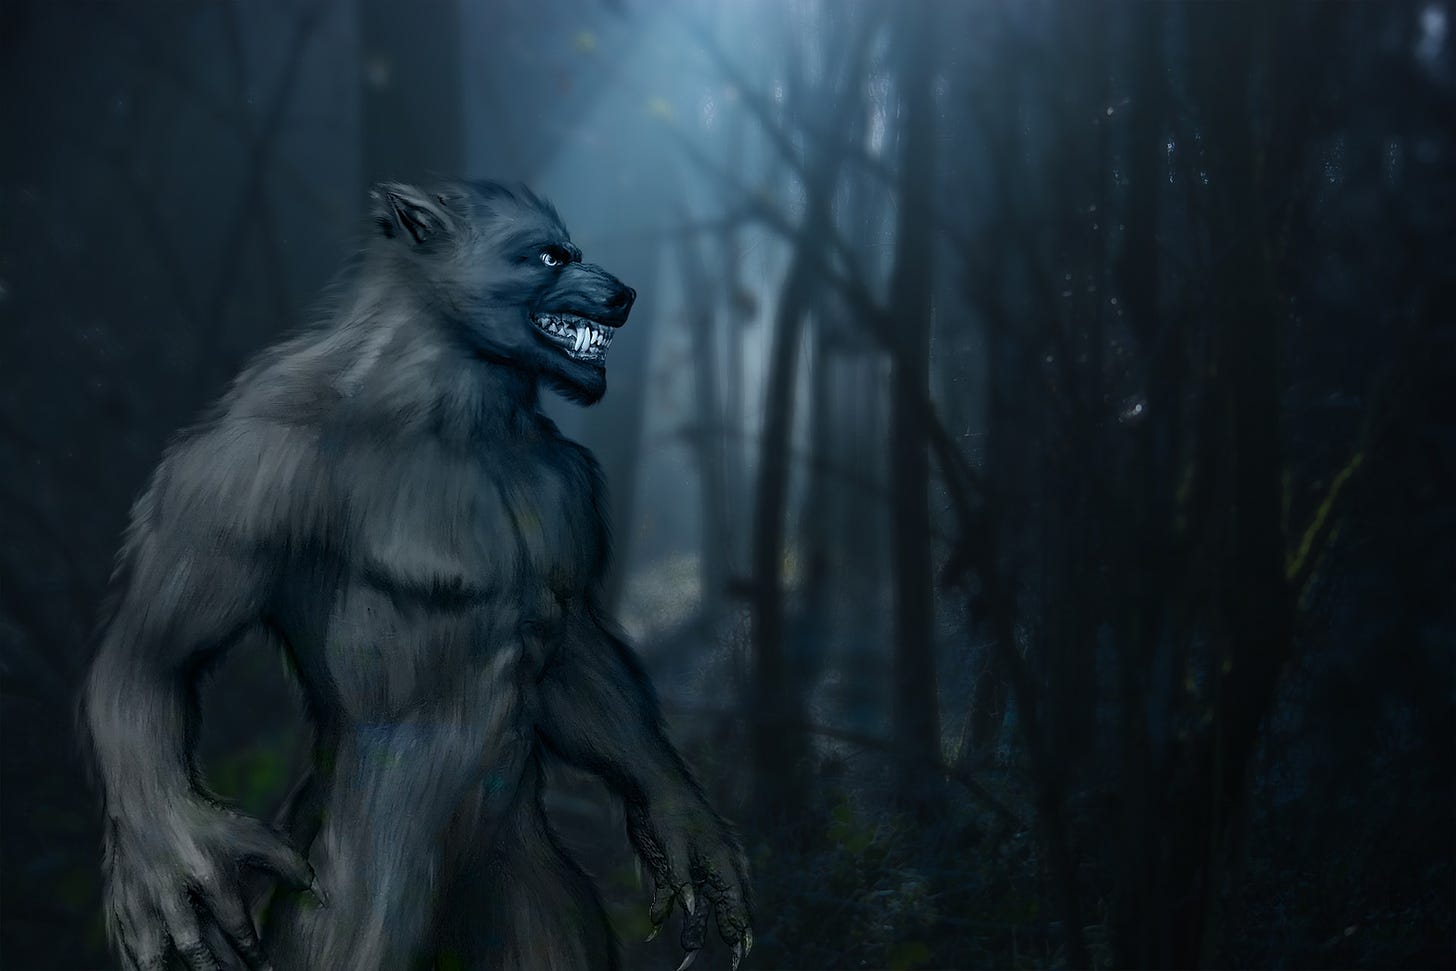 Werewolves are real